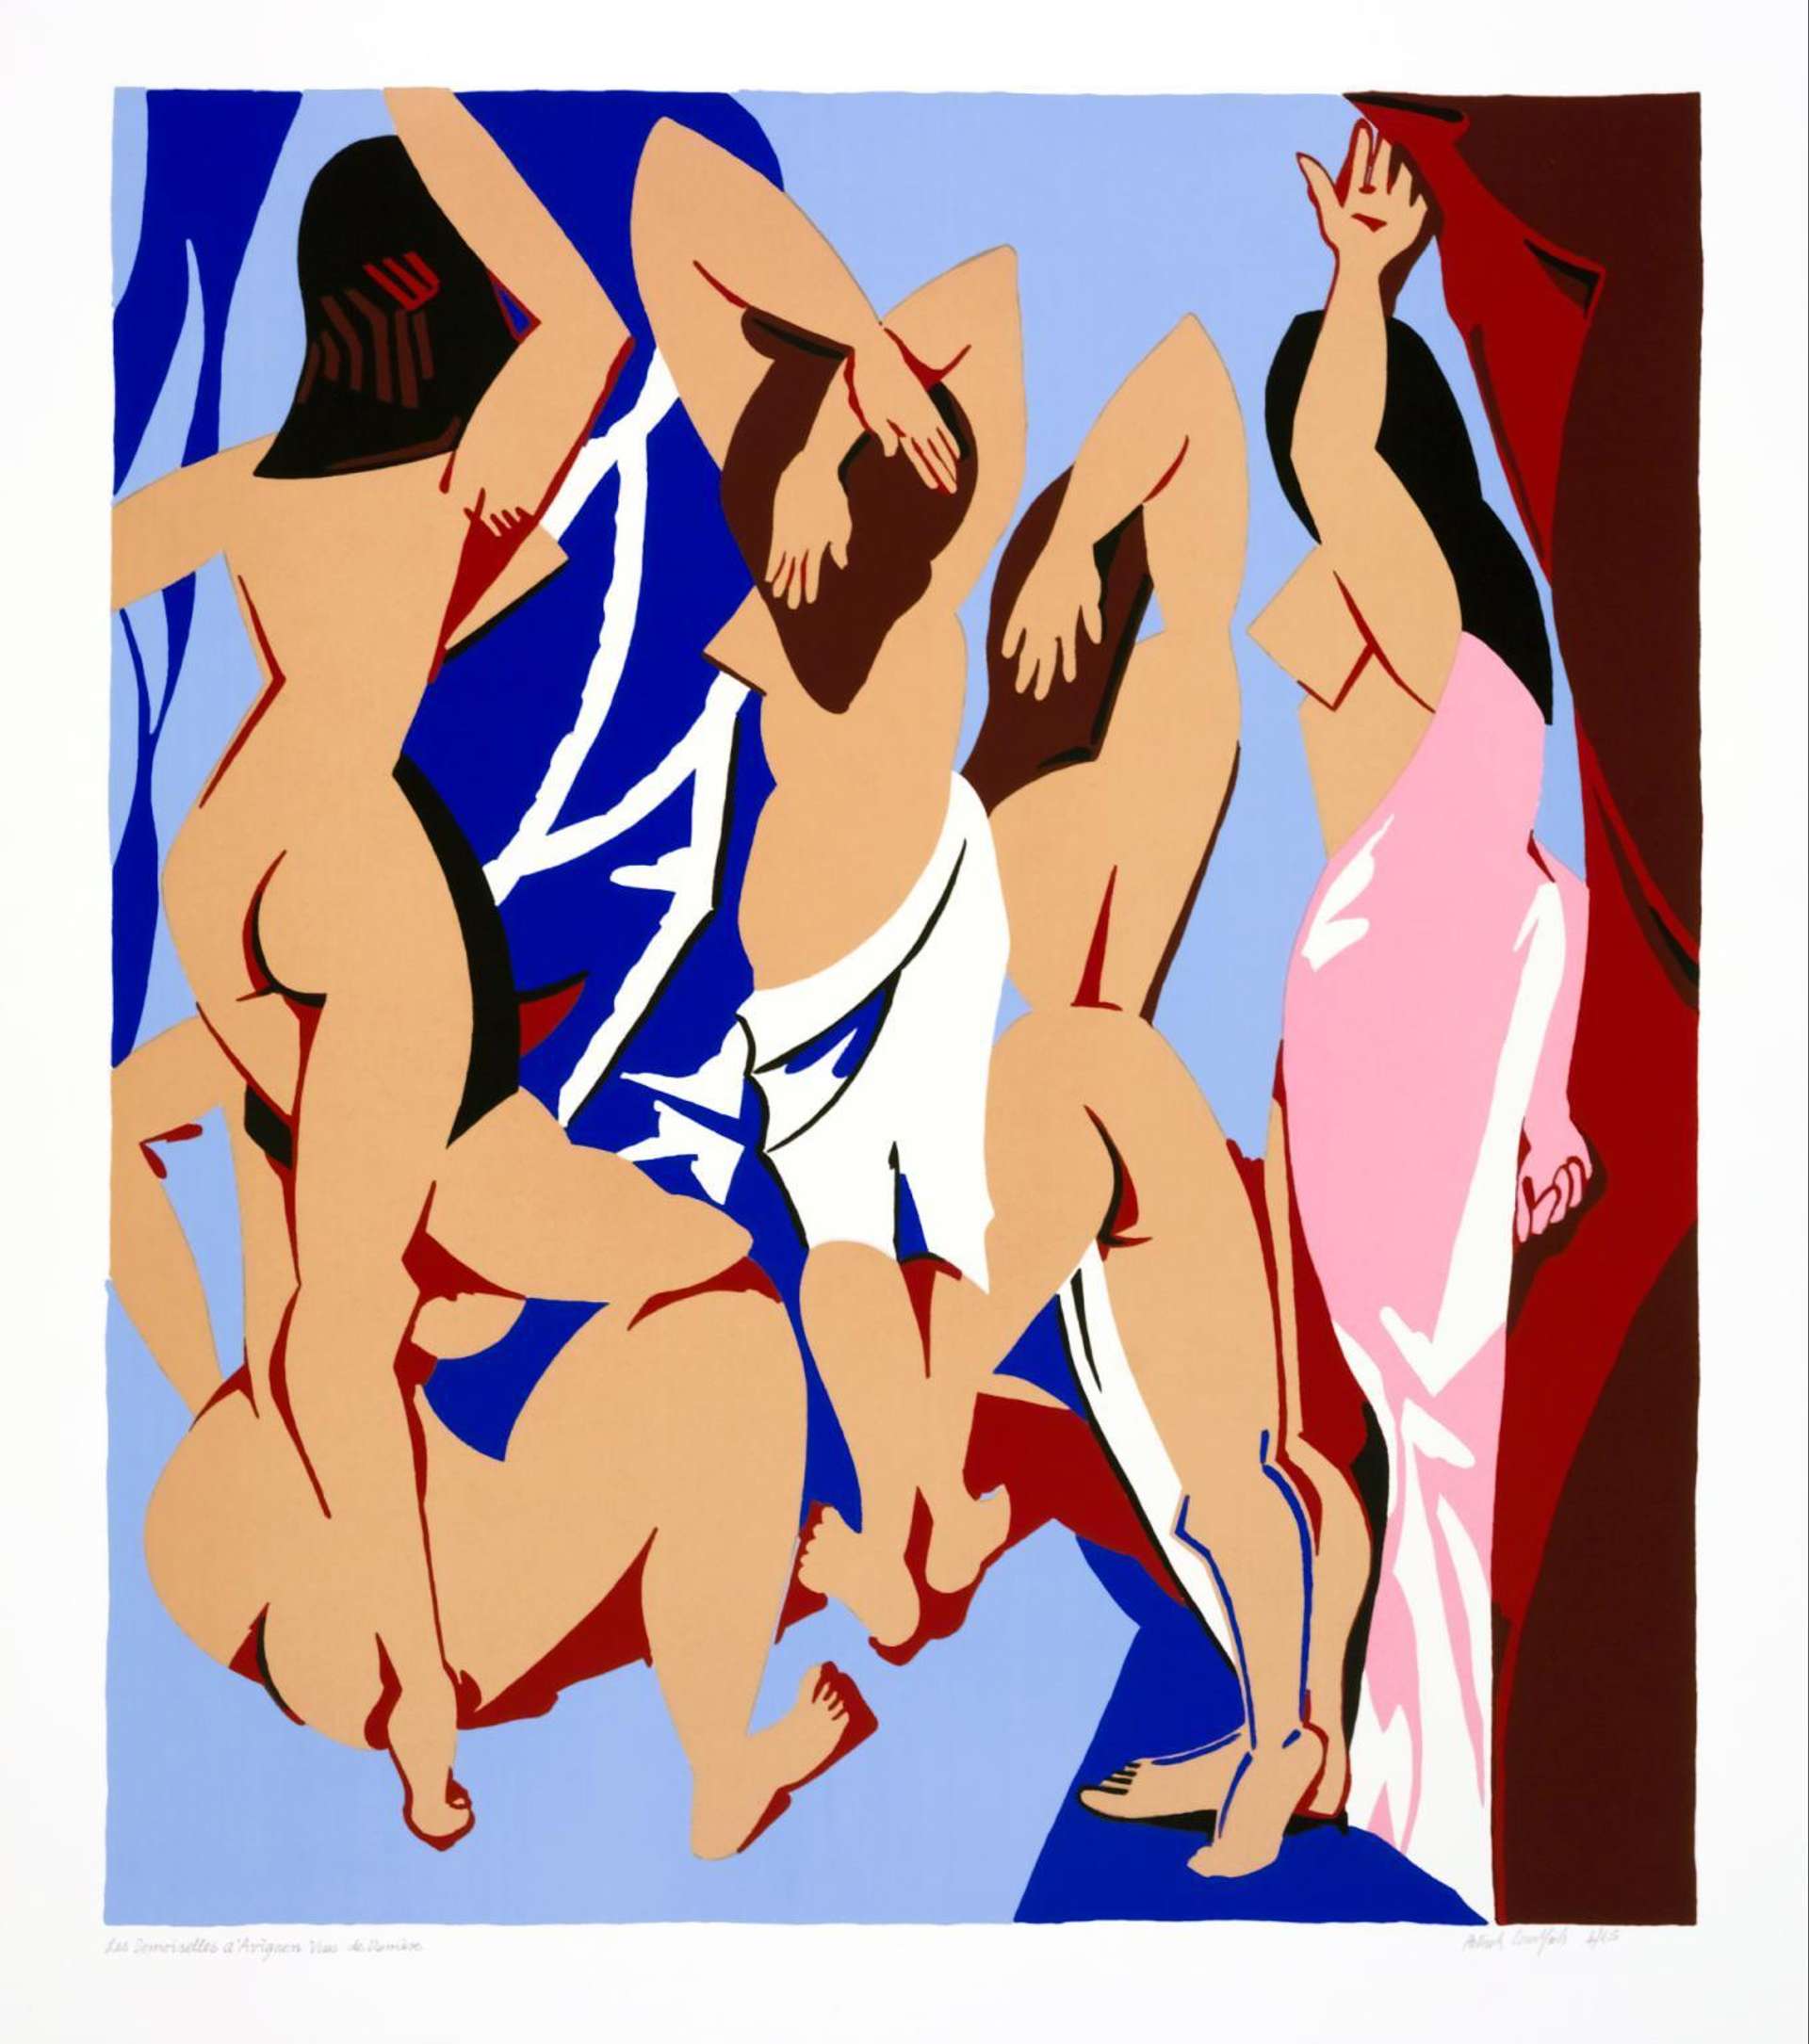 An image of the painting Les Demoiselles d’Avignon Vues De Derrière by Patrick Caulfield, which is a humorous take on Picasso’s Demoiselles d’Avignon. In Caulfield’s version, the figures are seen nude from behind